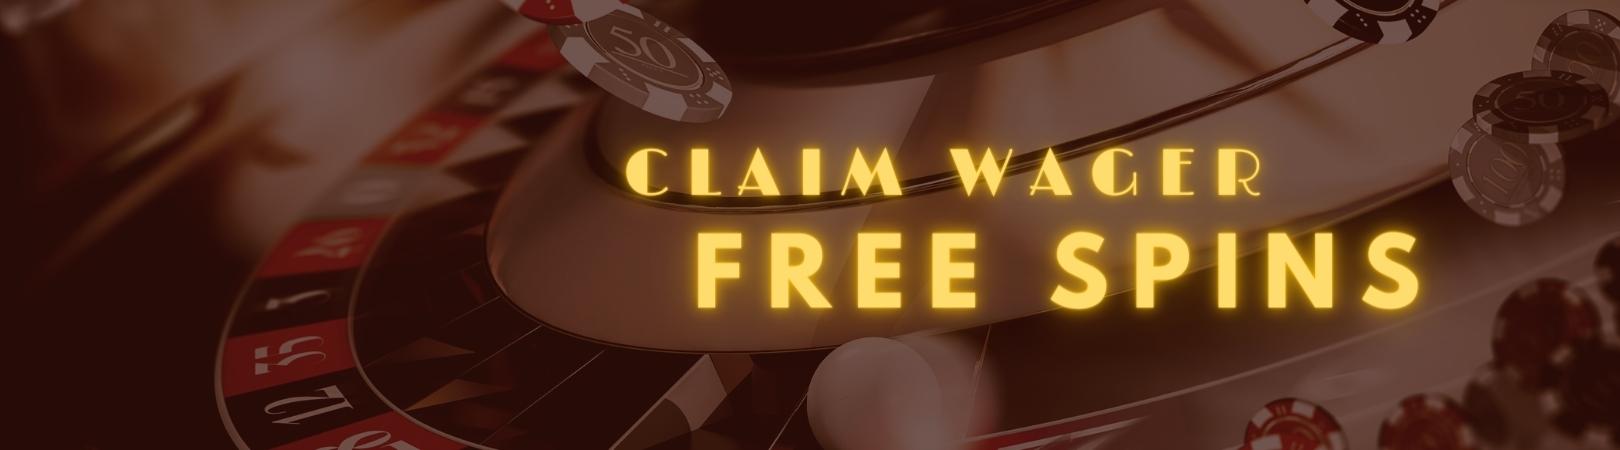 Claim wager free spins img